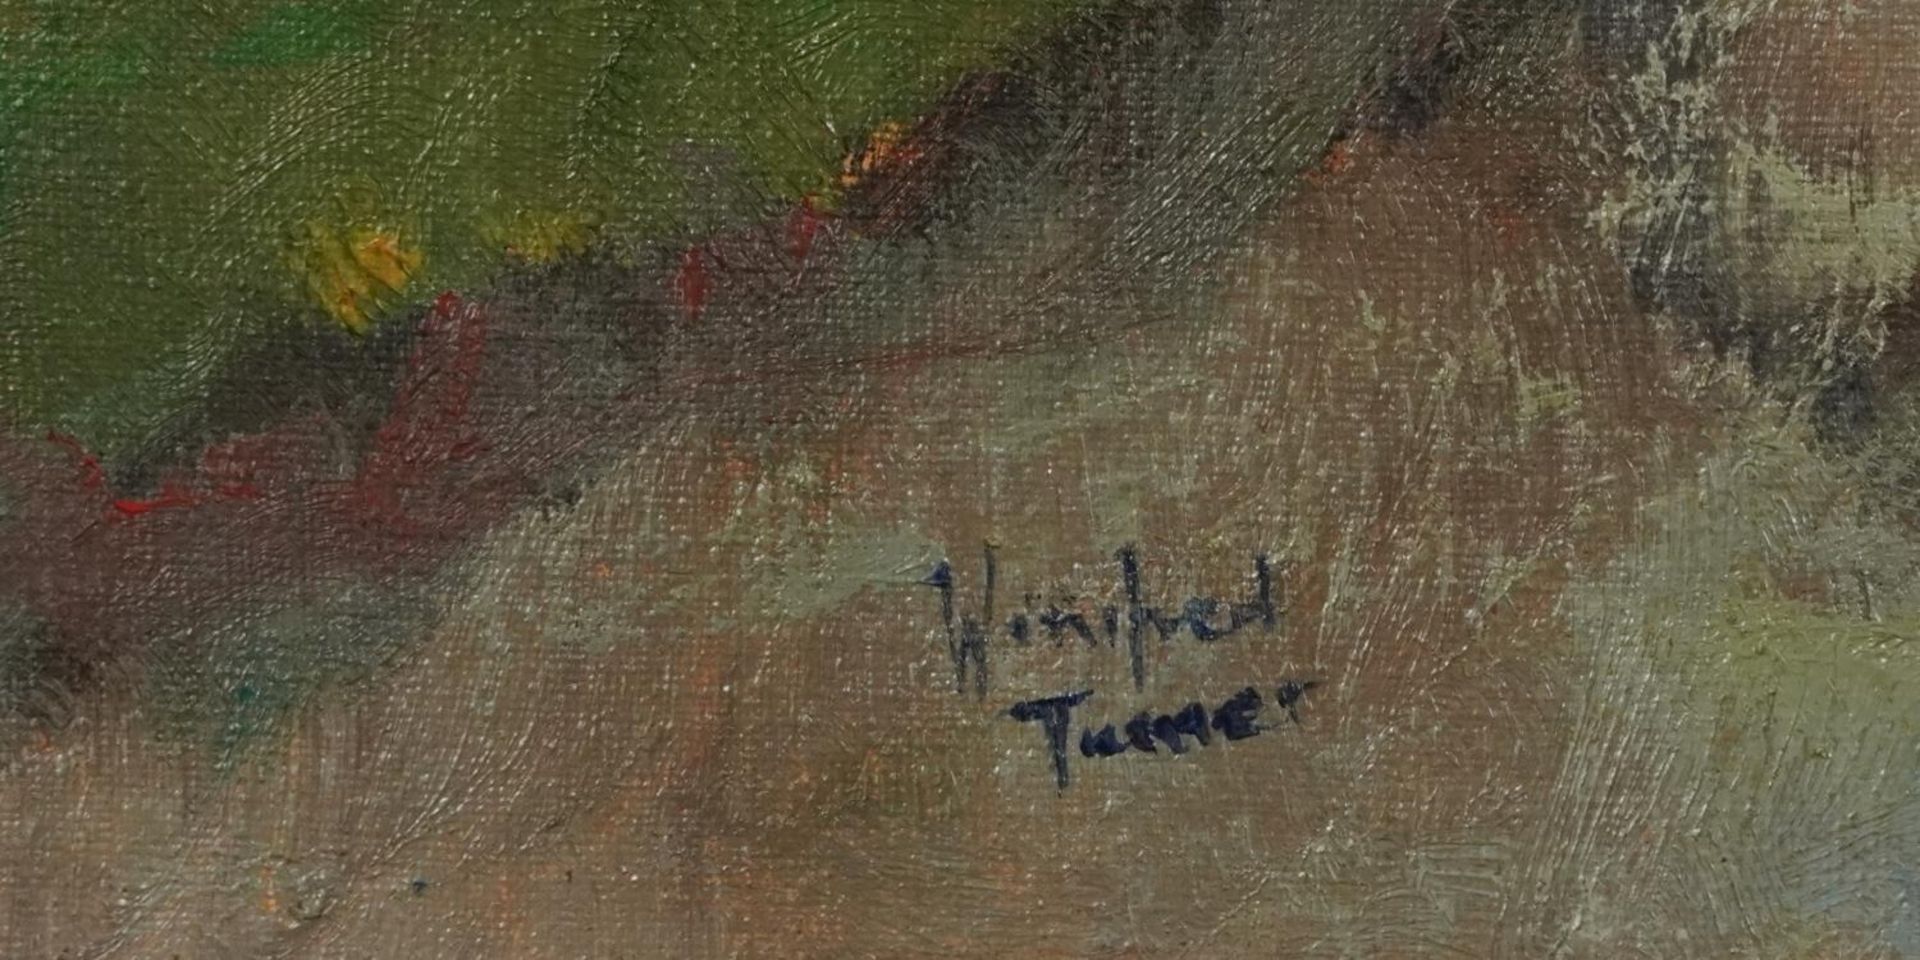 Winifred Turner - Low tide at Rye, Impressionist oil on canvas, details verso, mounted and framed, - Image 3 of 6